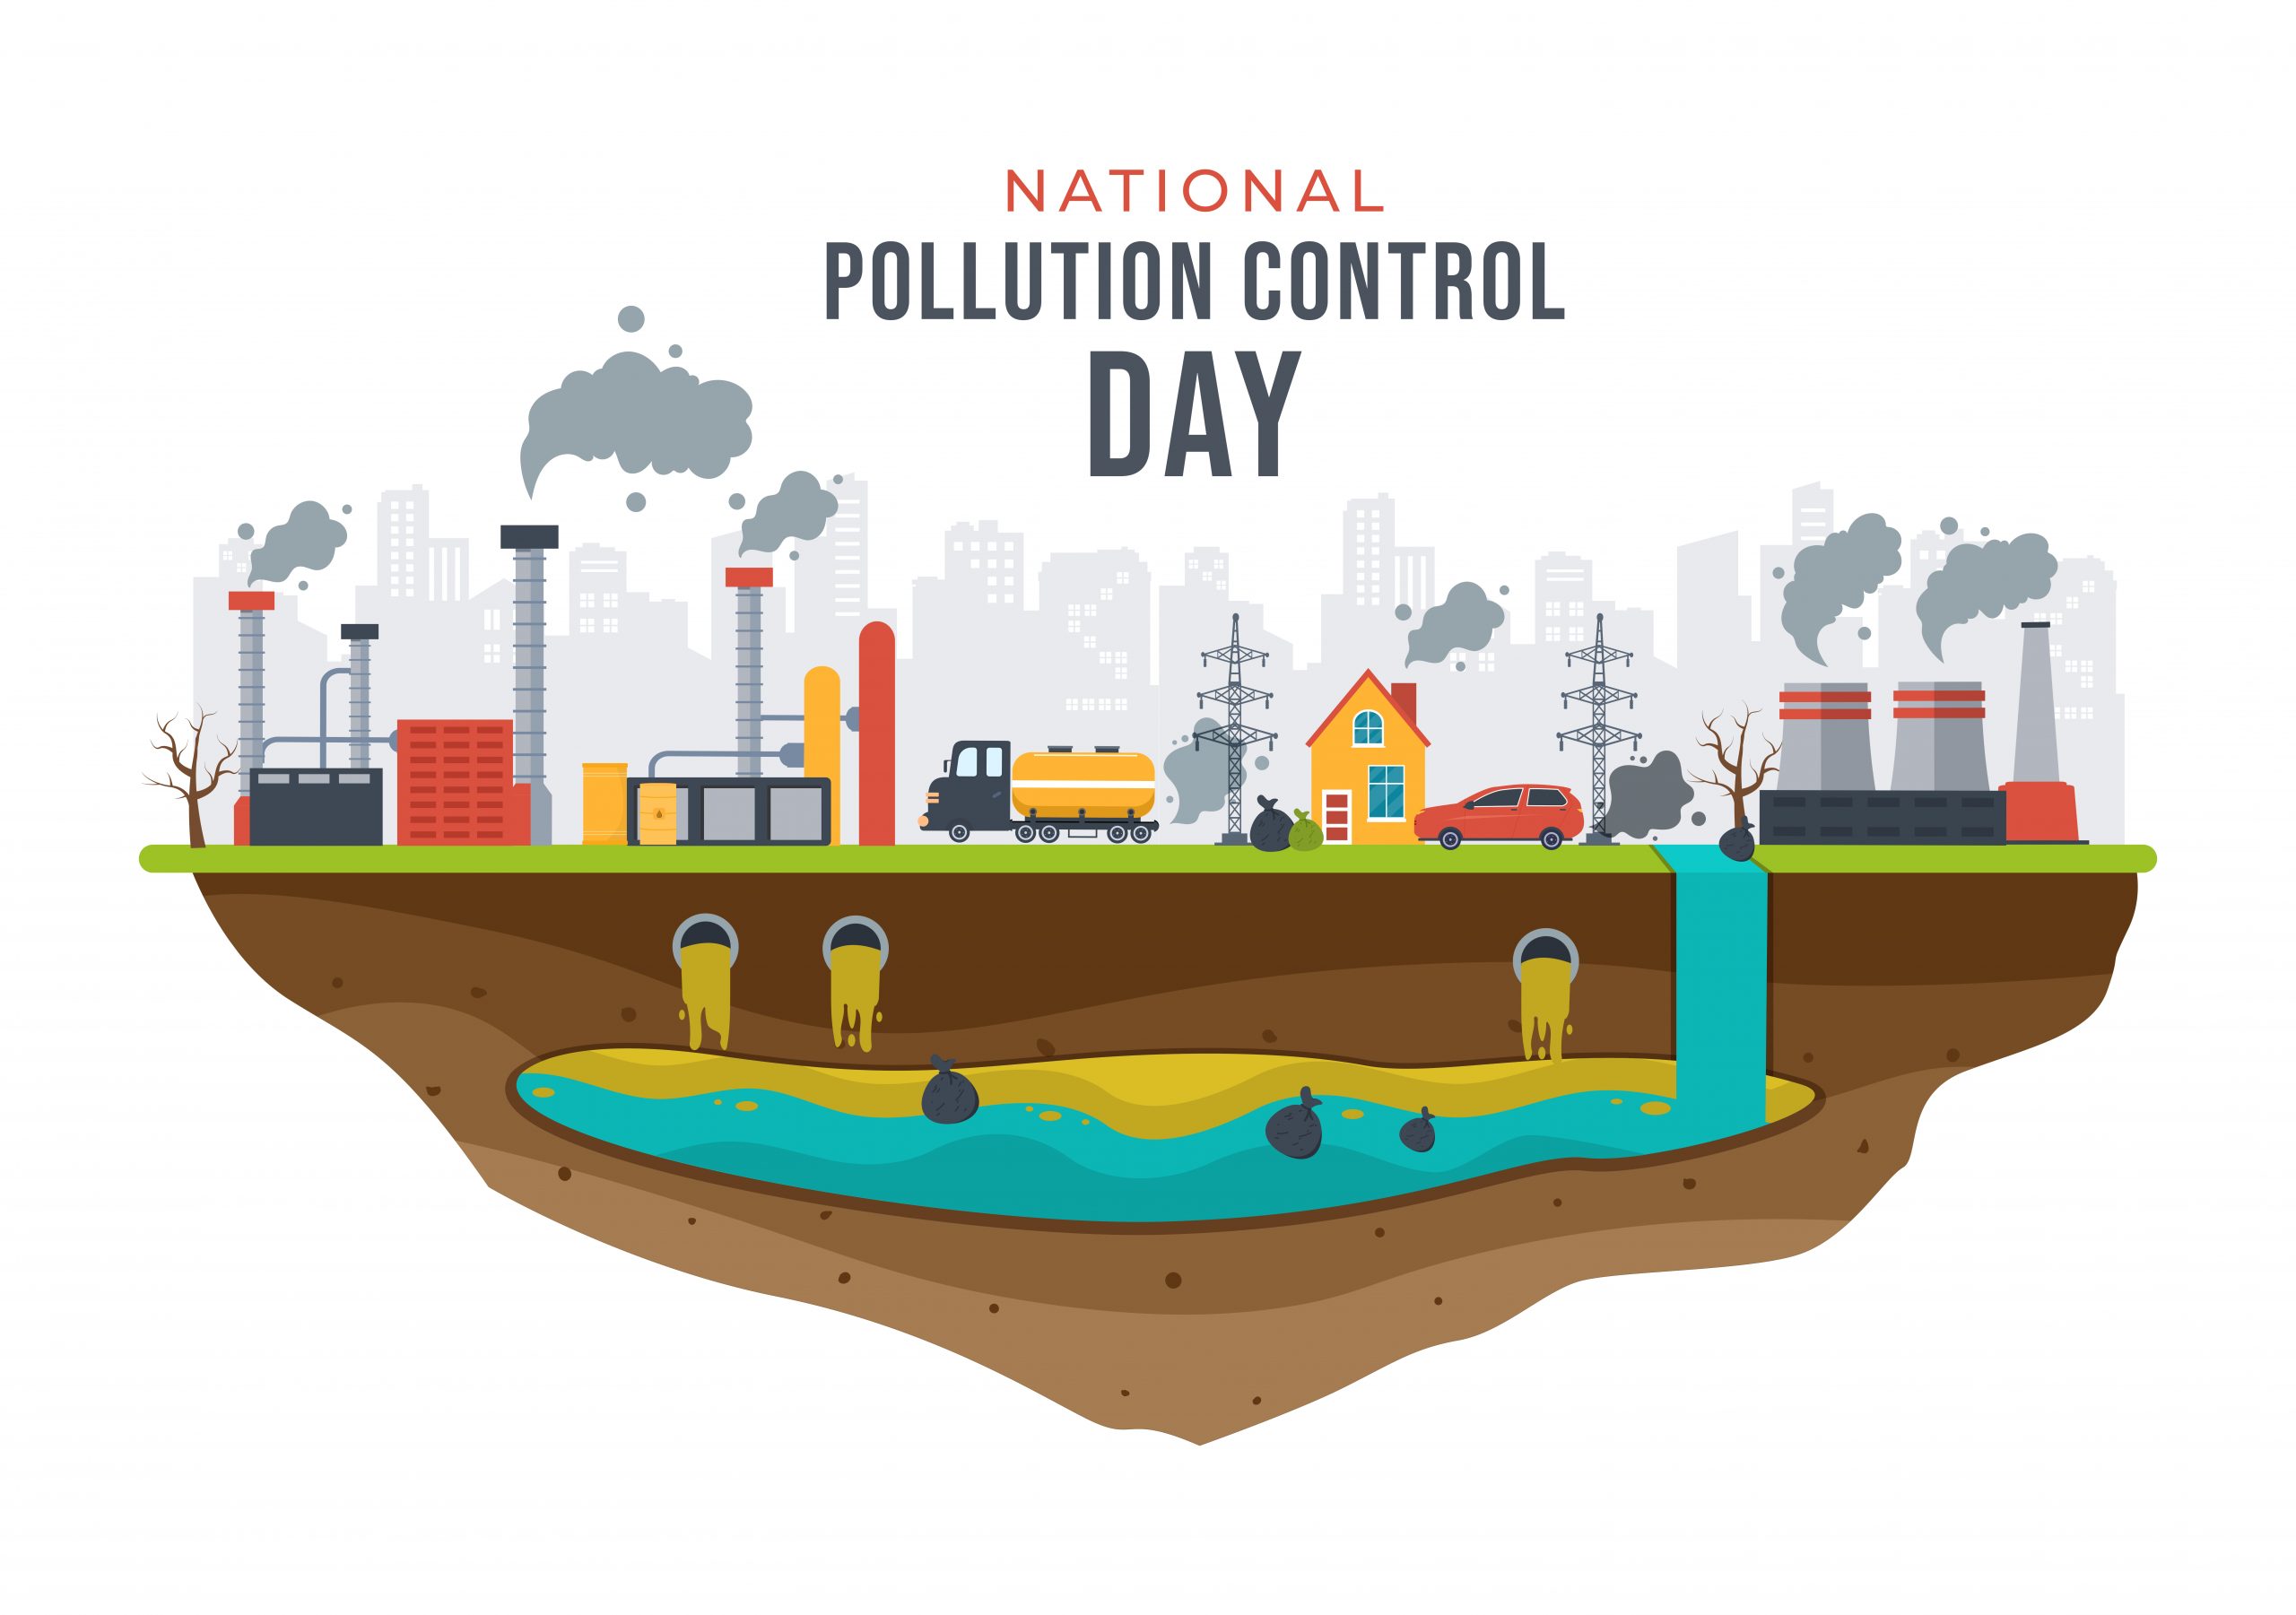 STUDENTS CREATE AWARENESS ON NATIONAL POLLUTION CONTROL DAY